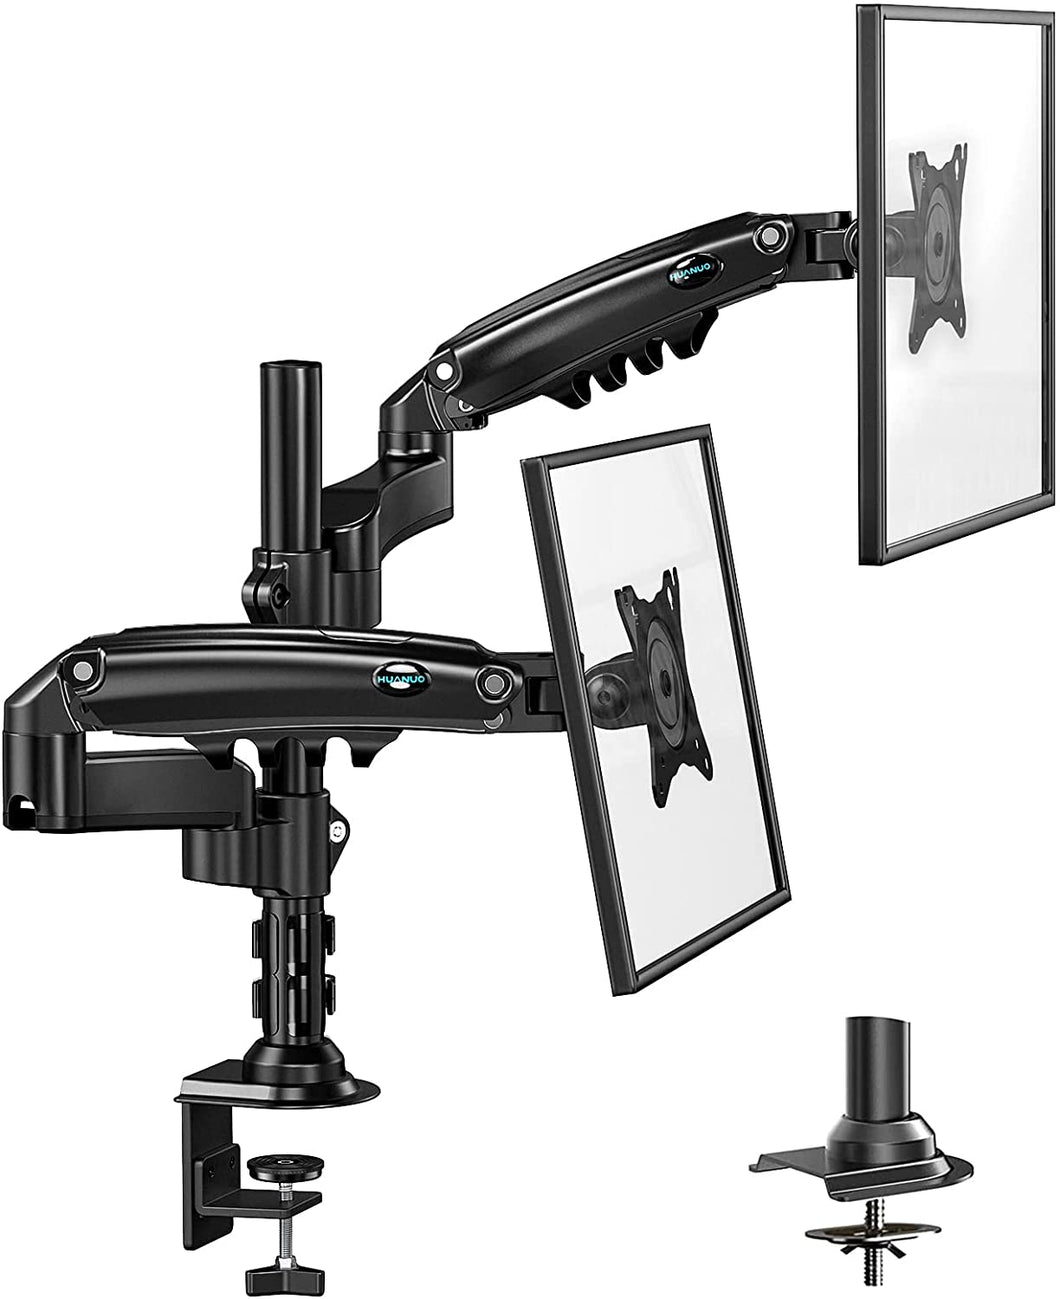 HUANUO Dual Monitor Stand - Height Adjustable